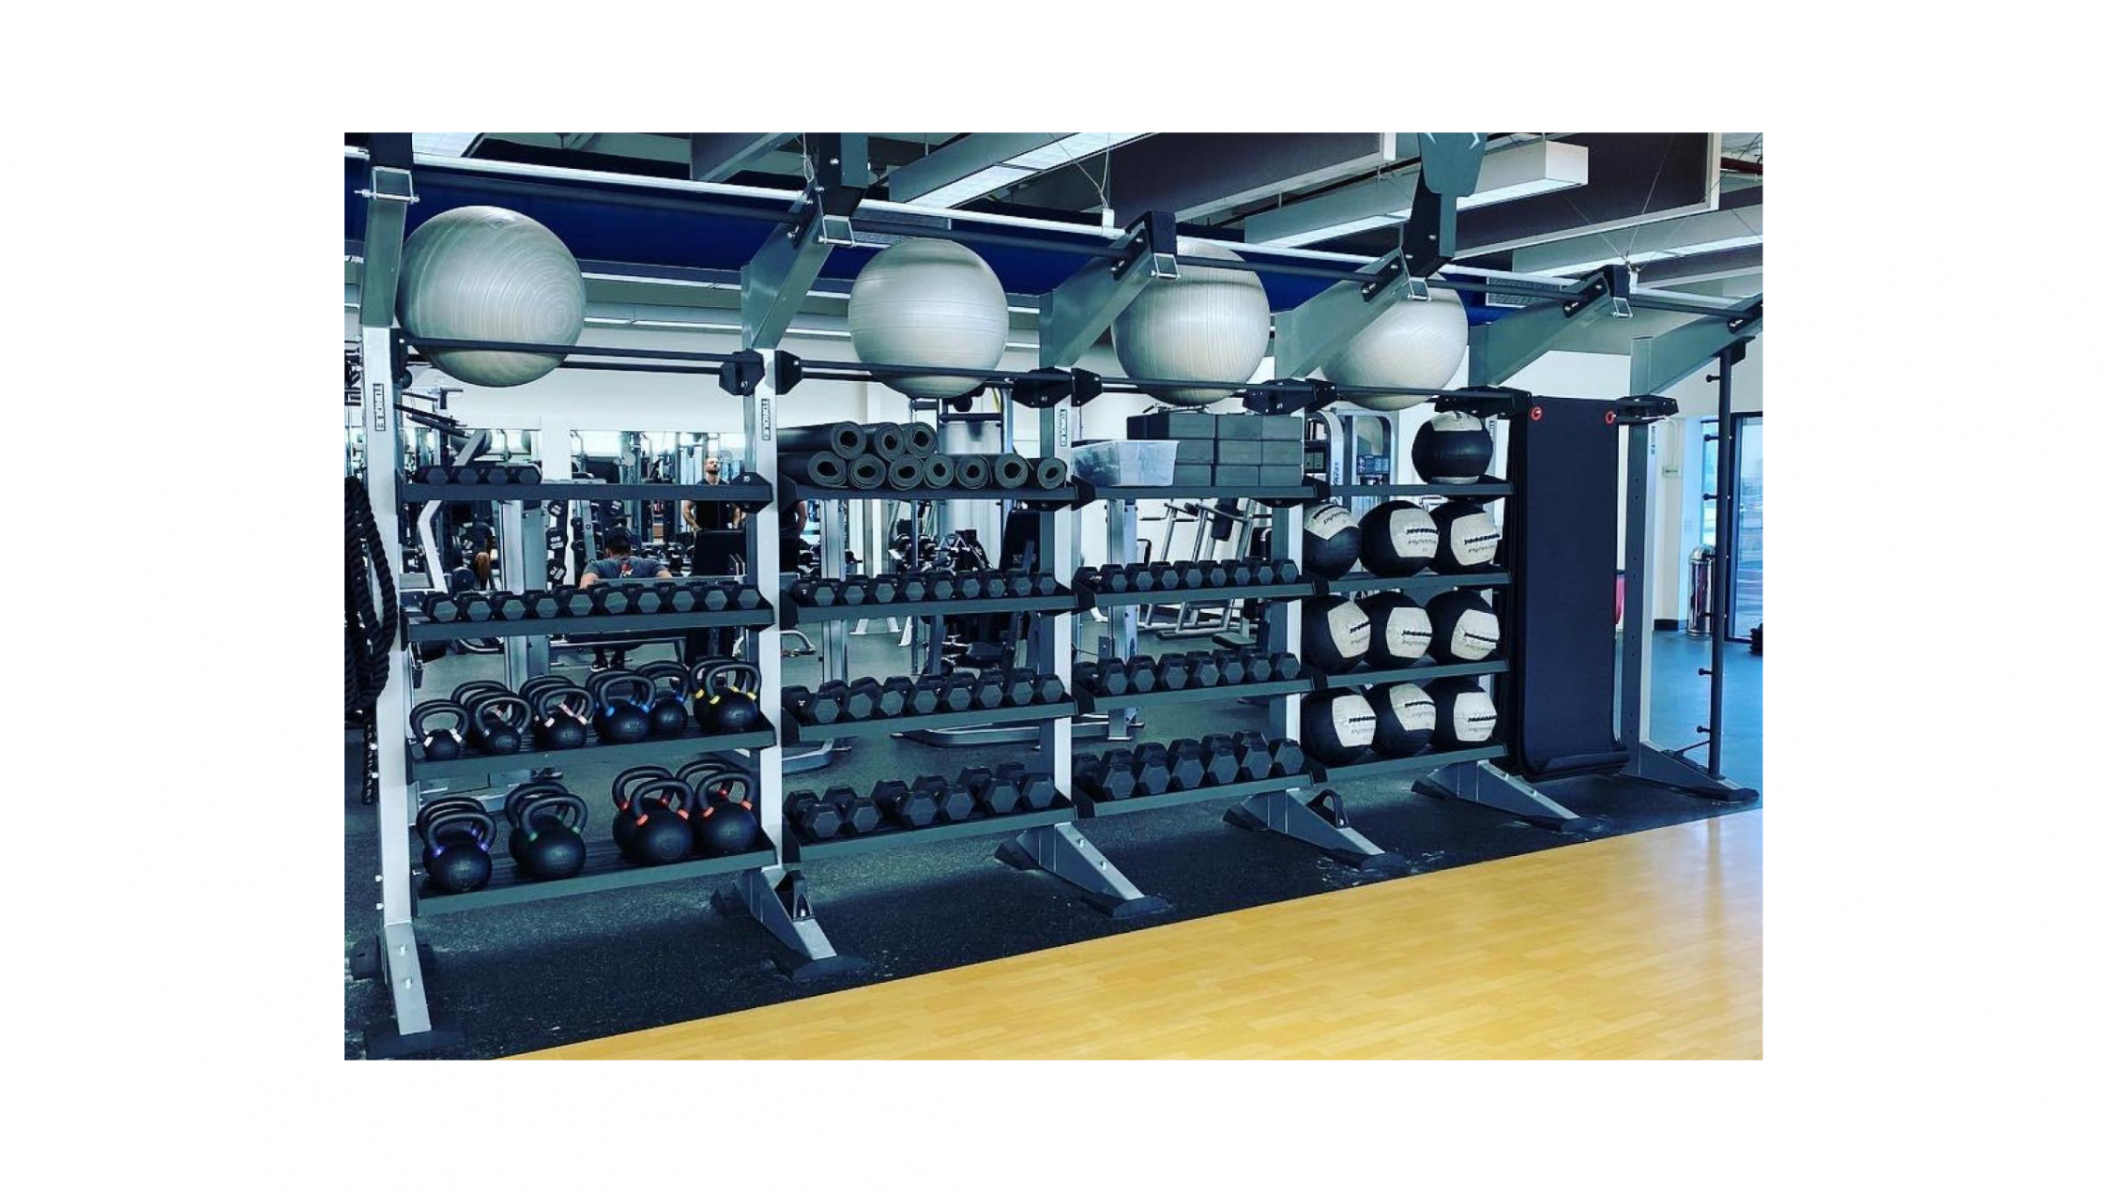 Torque Fitness 4 Bay Accessory Rack filled with Accessories.